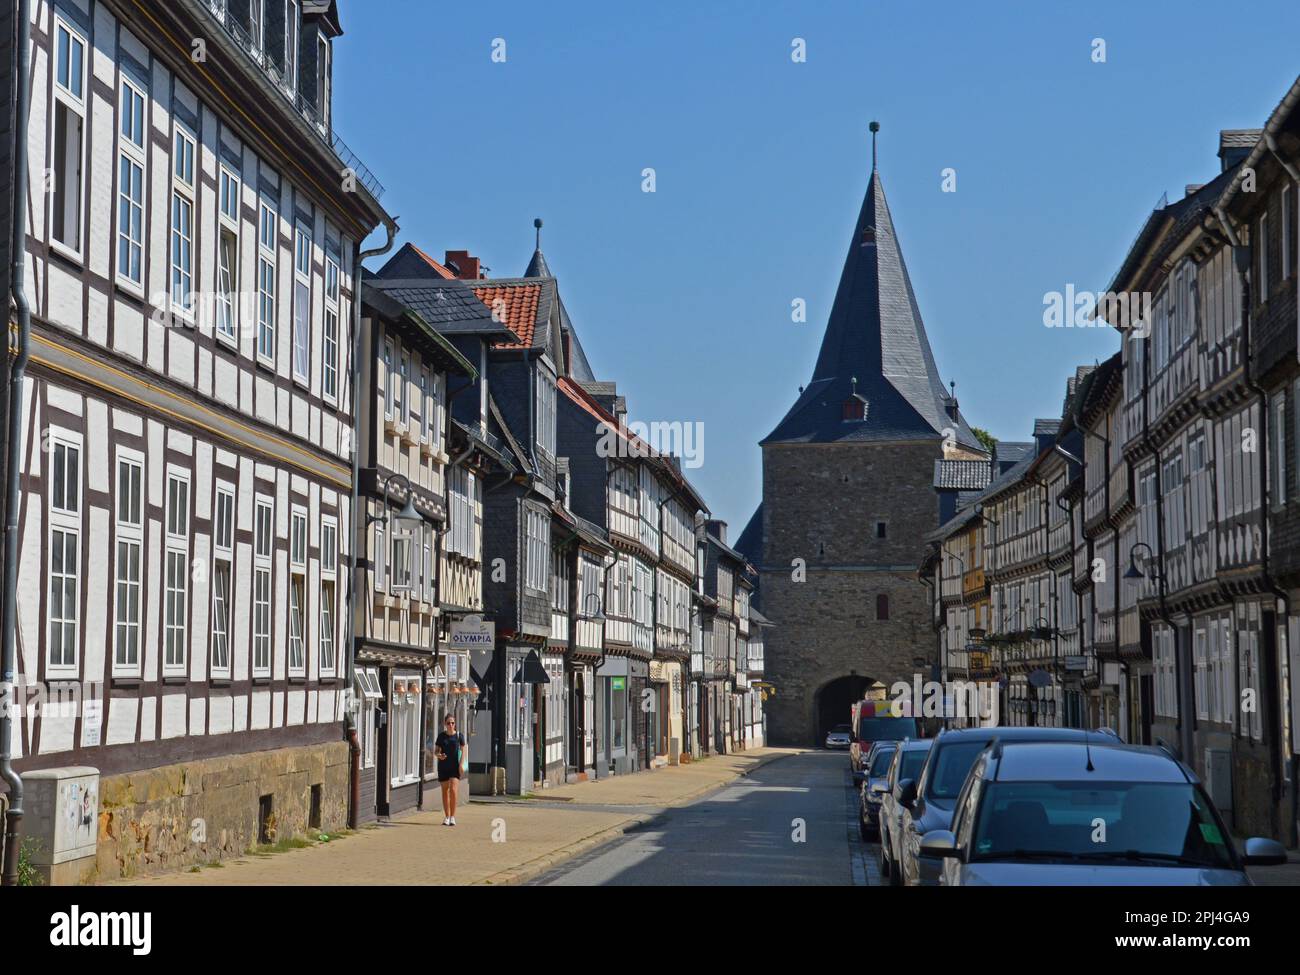 Germany, Lower Saxony, Goslar:  Breites Tor ('Wide Gate'), built in 1443, at the end of the Breite Strasse, lined with old timber frame houses. Stock Photo